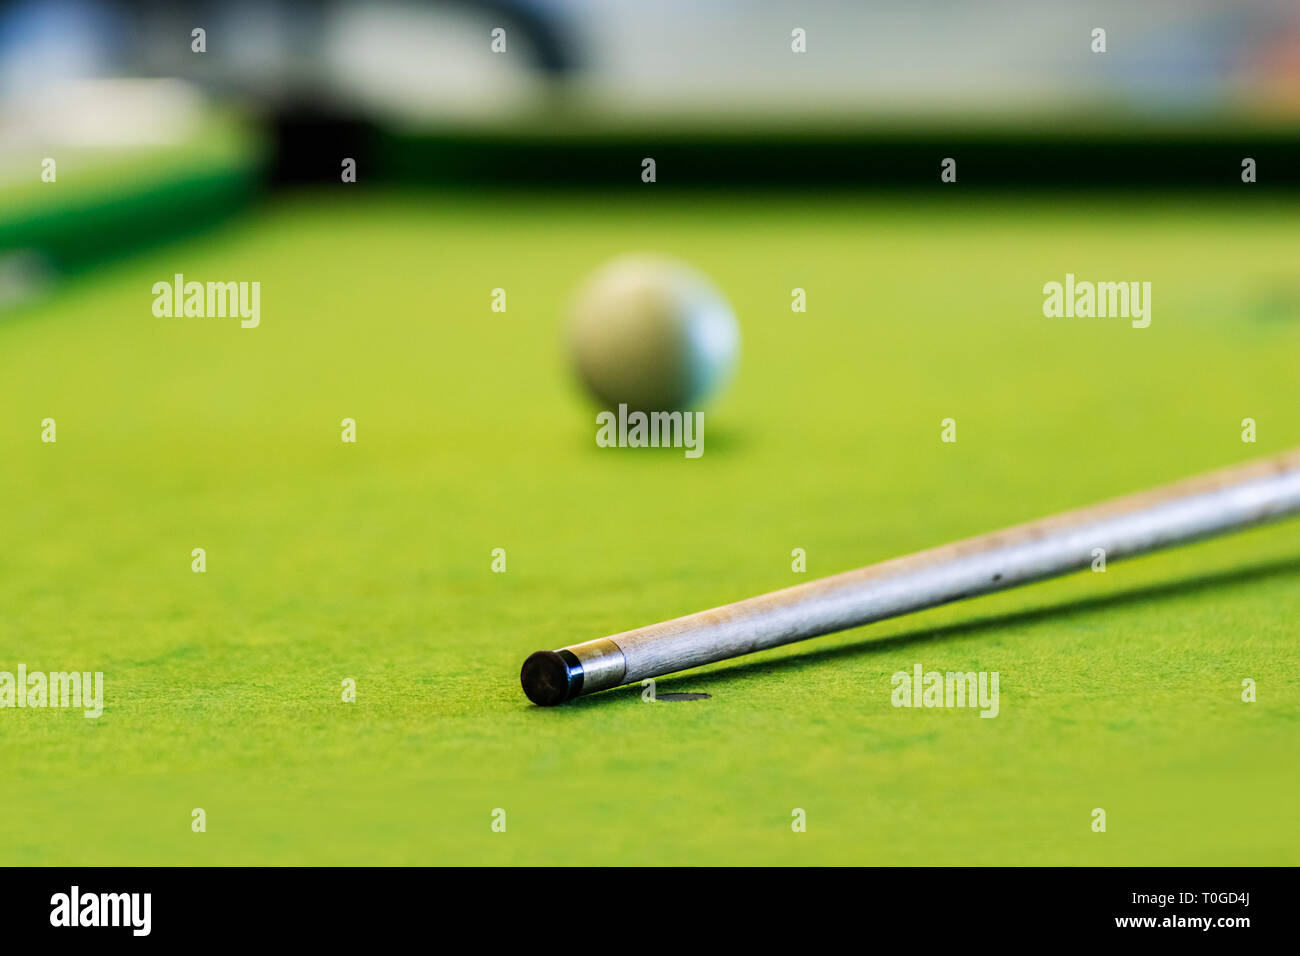 Closeup of a pool cue stick over a blurred white ball background. Stock Photo